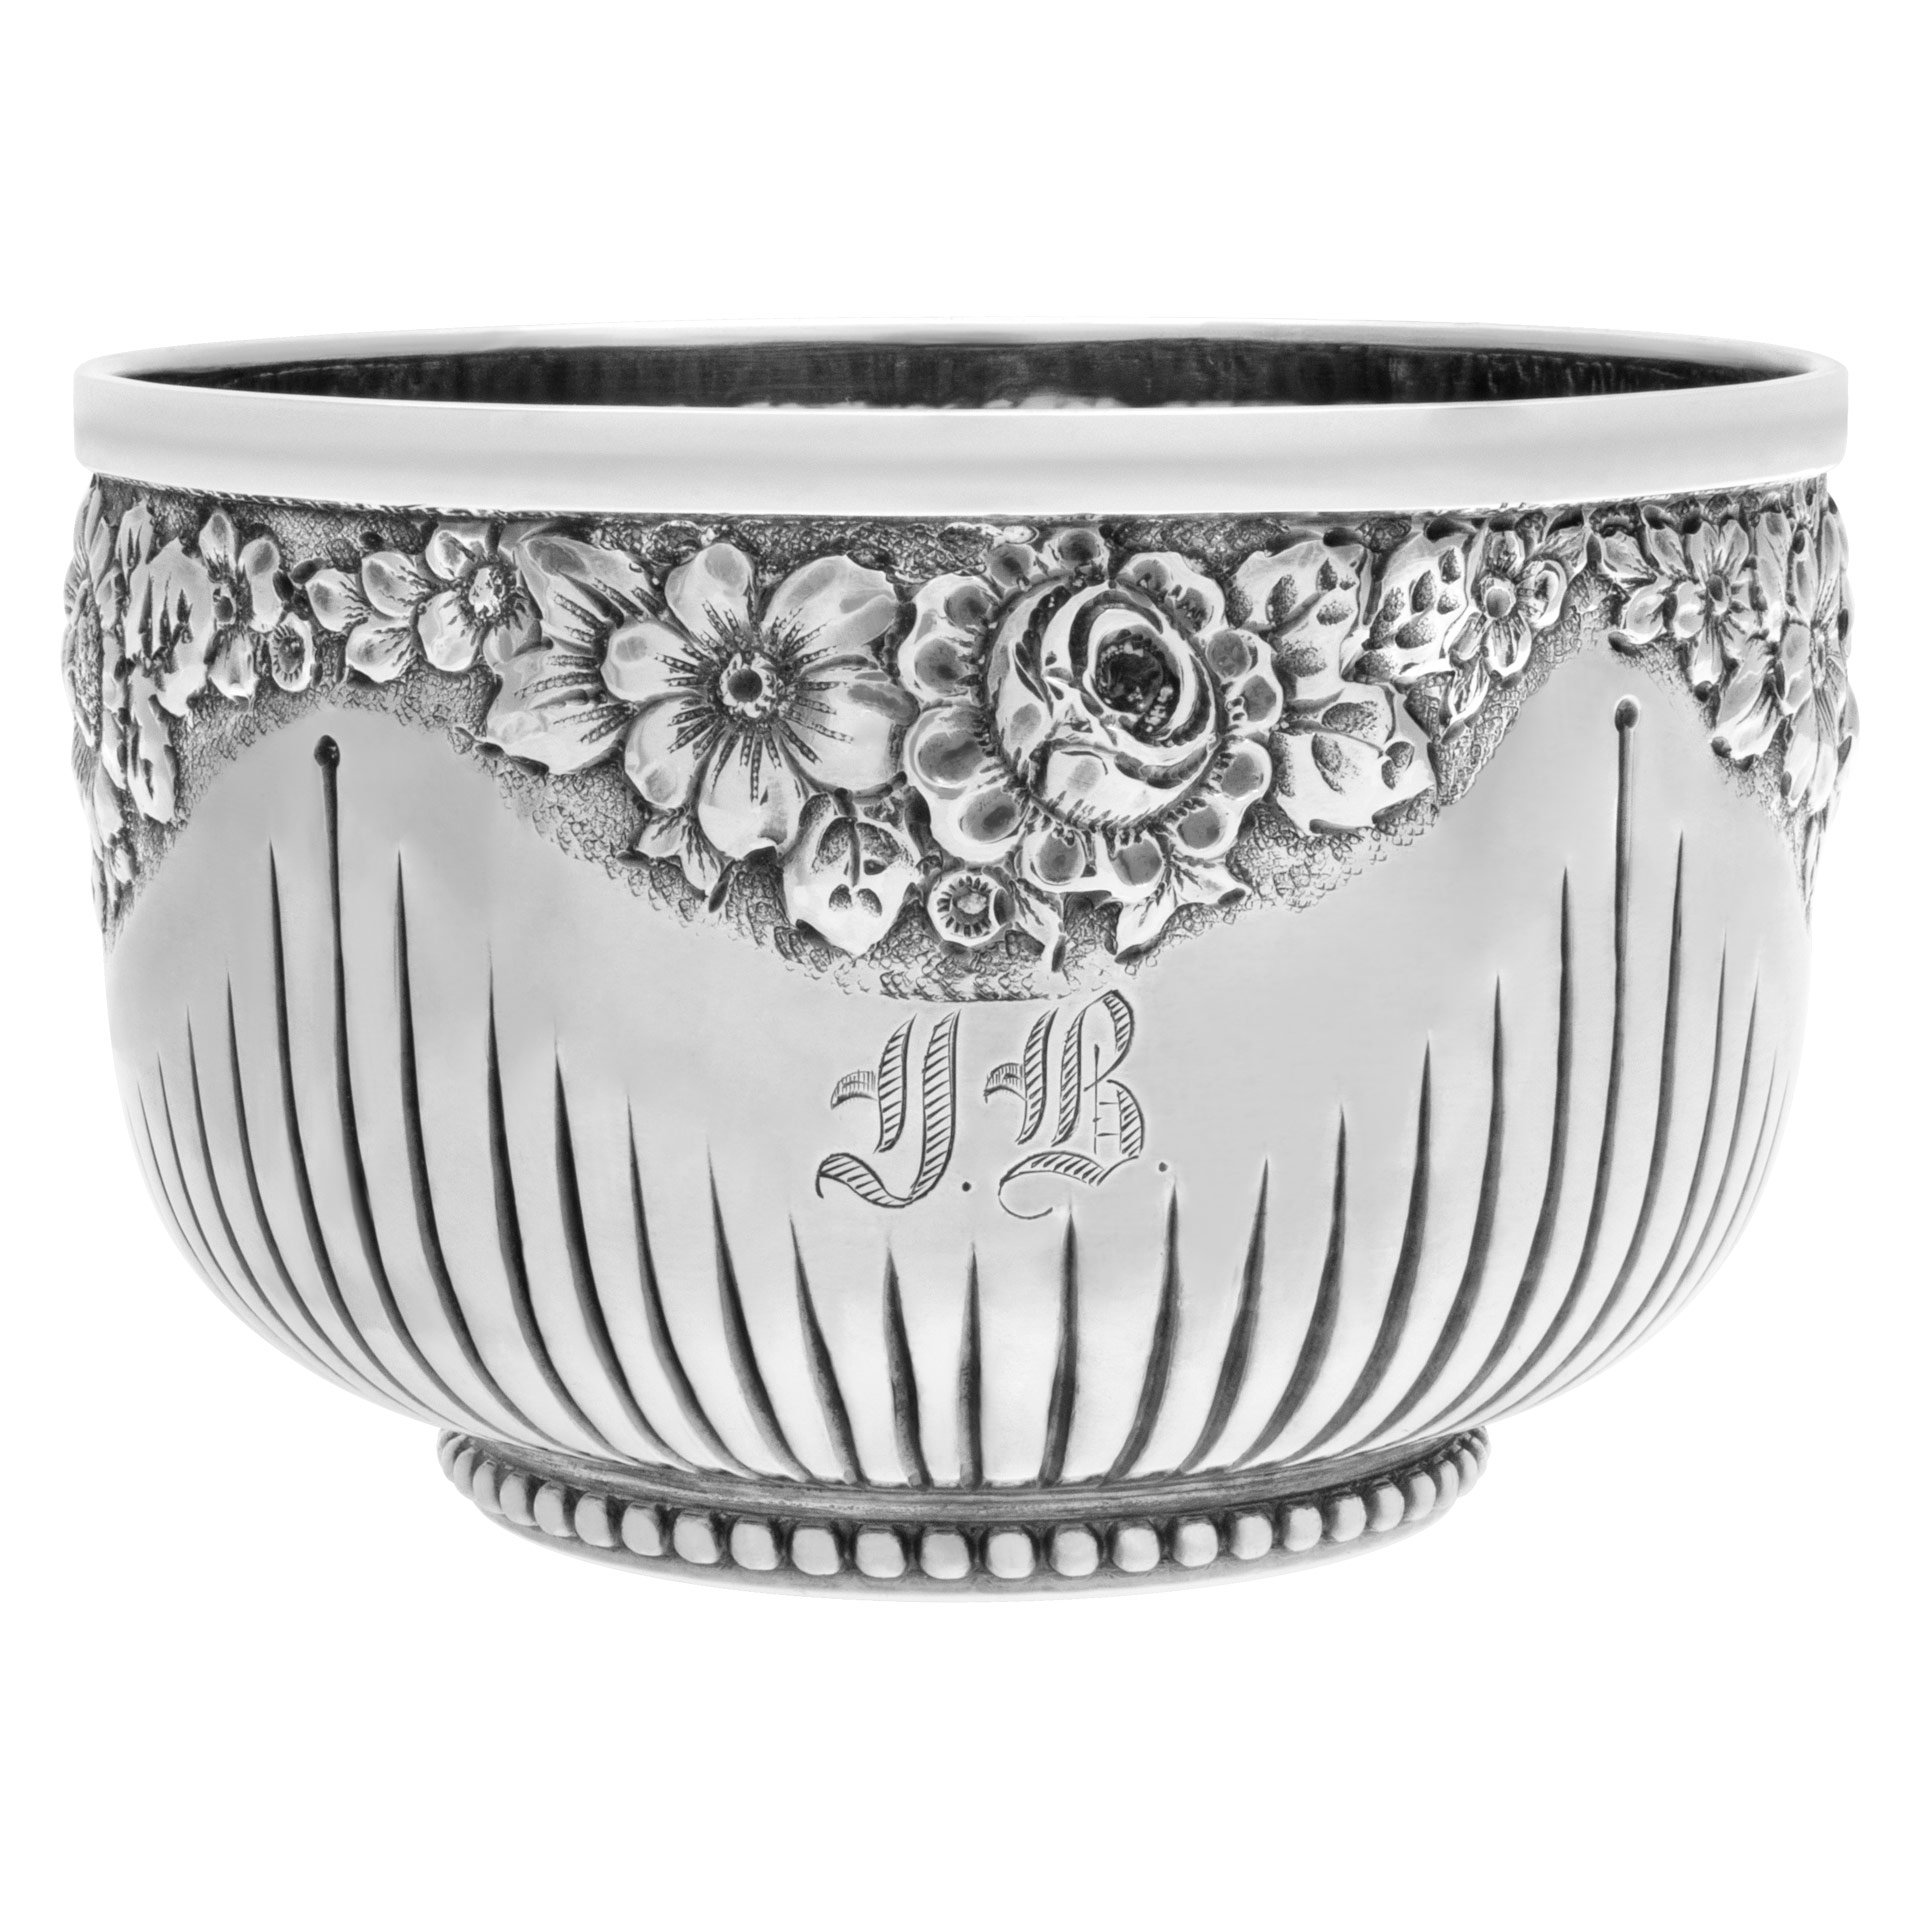  "Cluny" Ptd 1883, Pair Of Sterling Silver Demi-Tasse Coffe Cup With Matching Saucer. image 2